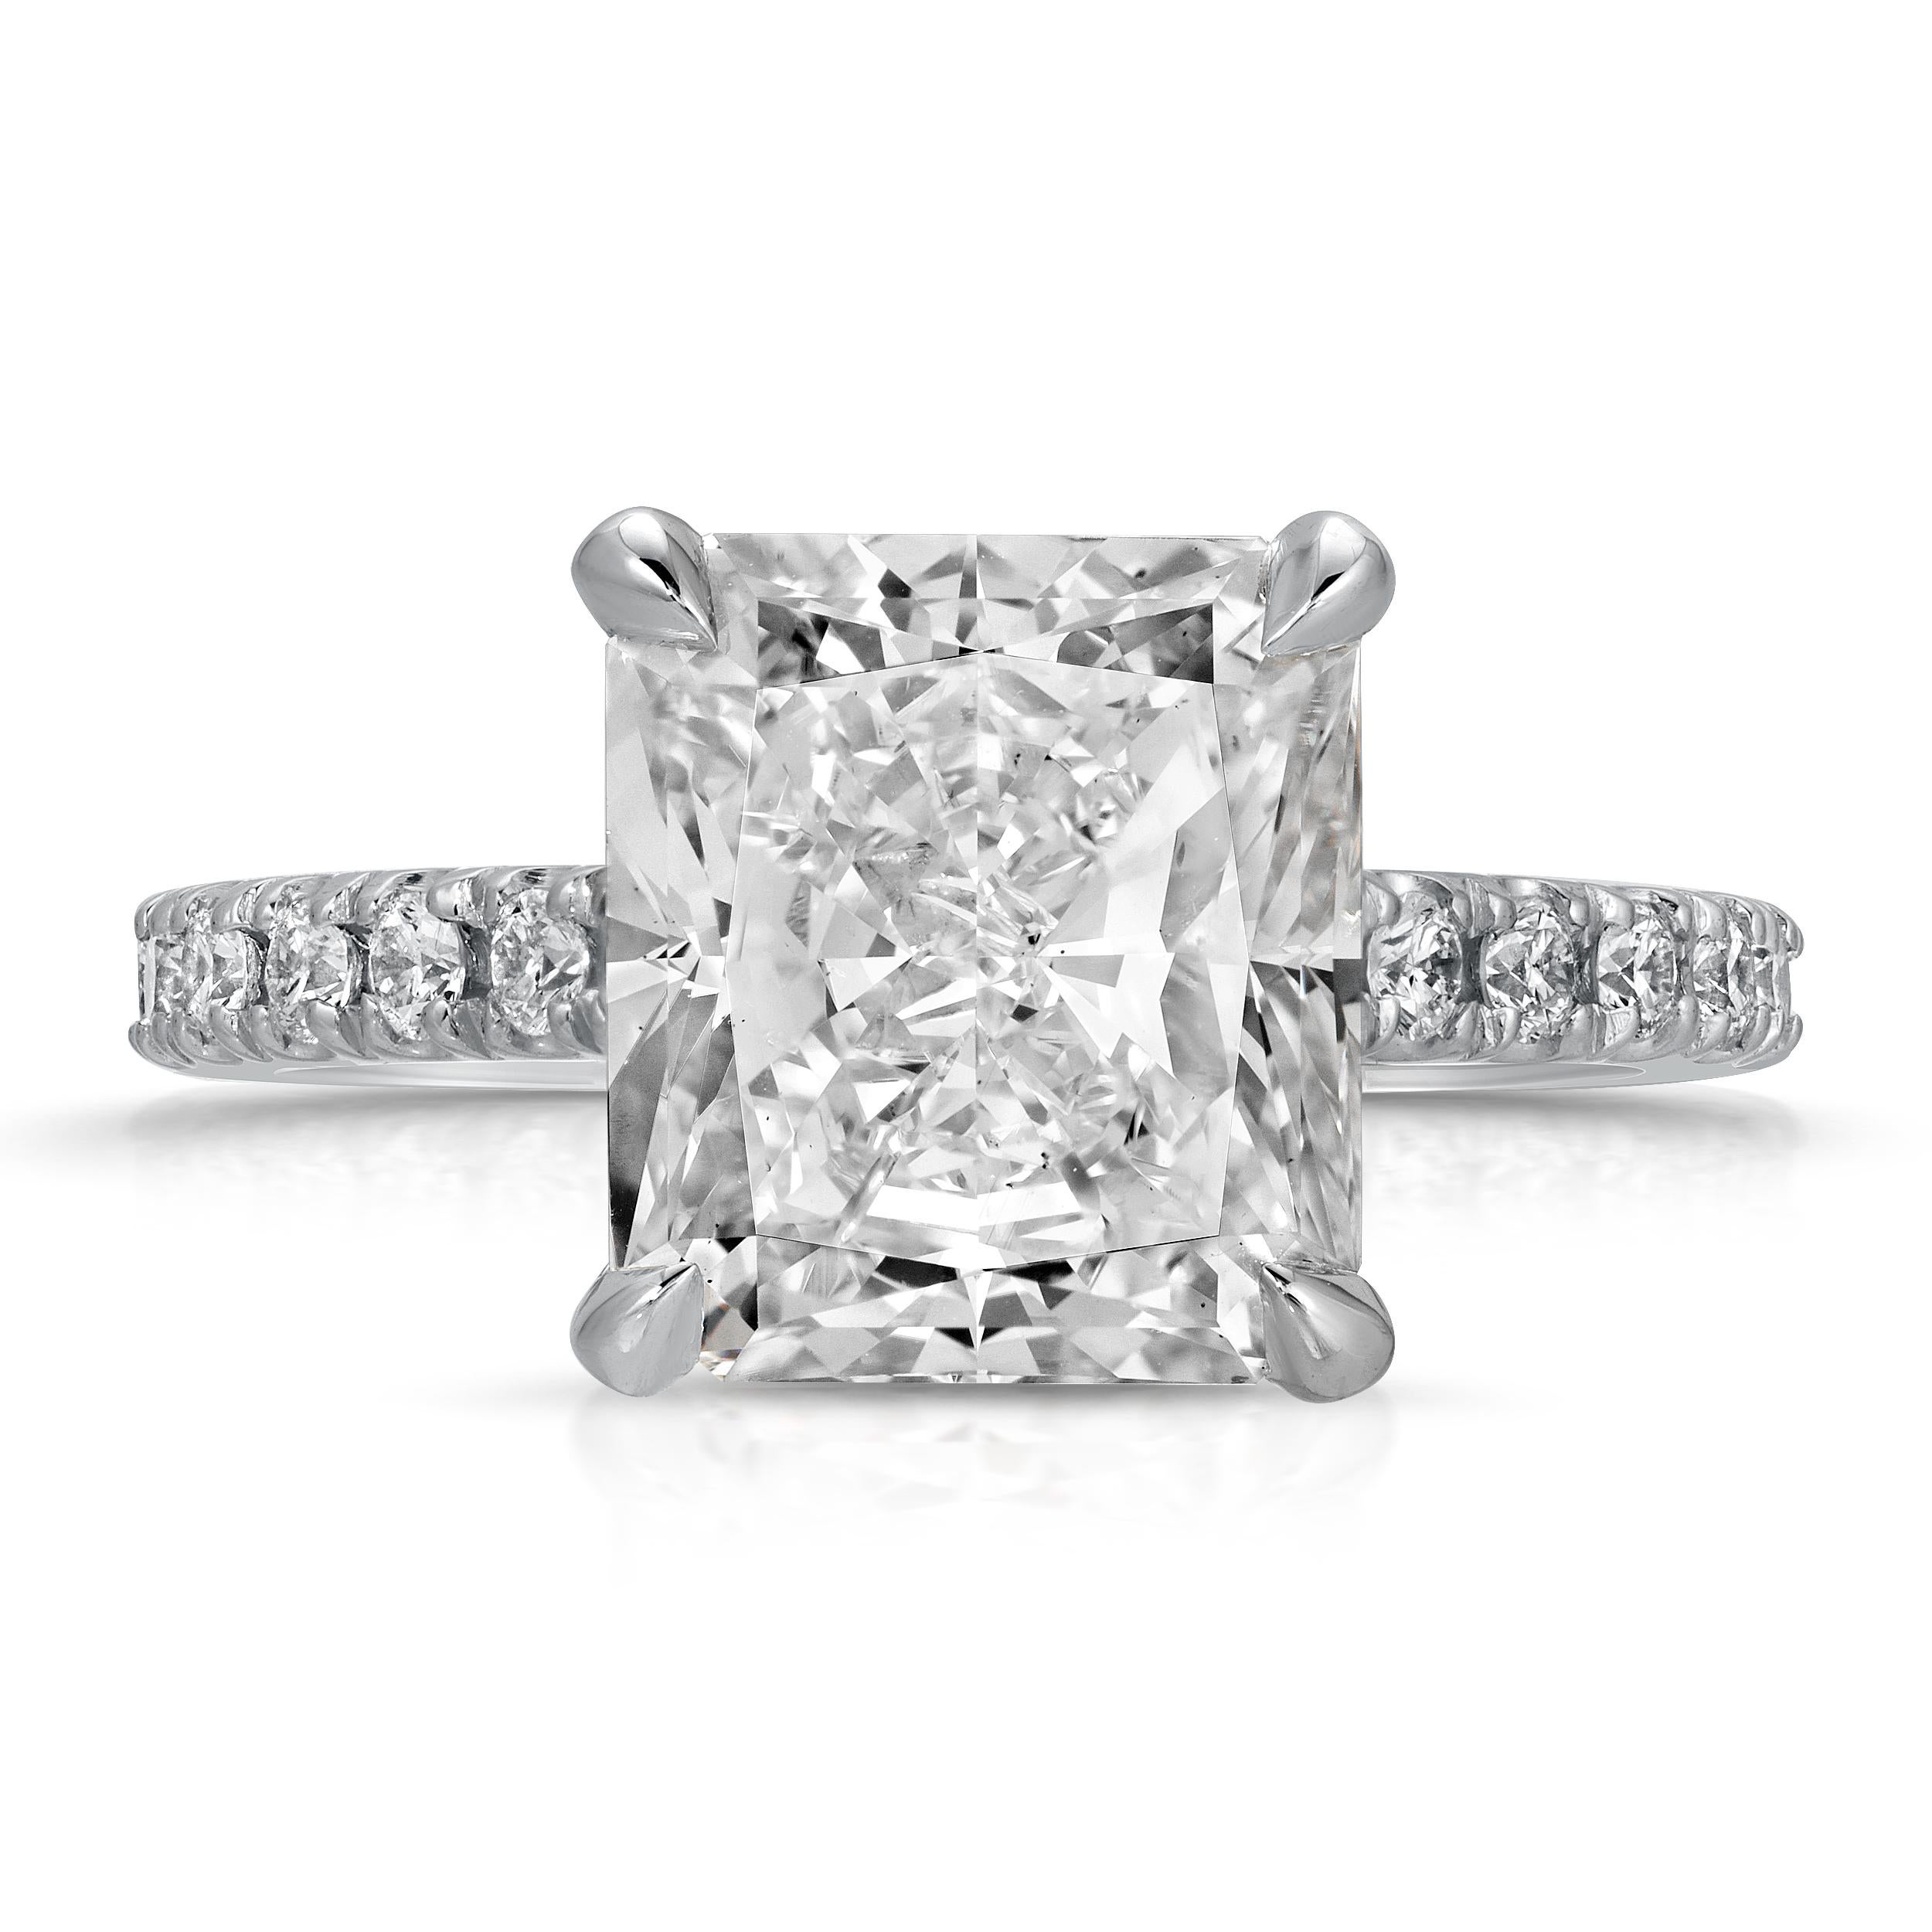 This spectacular Hidden Halo diamond engagement ring will certainly fascinate any jewelry lover. SGL certified 5.02 Carat G/ VS2 Radiant cut center diamond is mounted on a cathedral style four-prong white gold ring. The ring basket and shank are